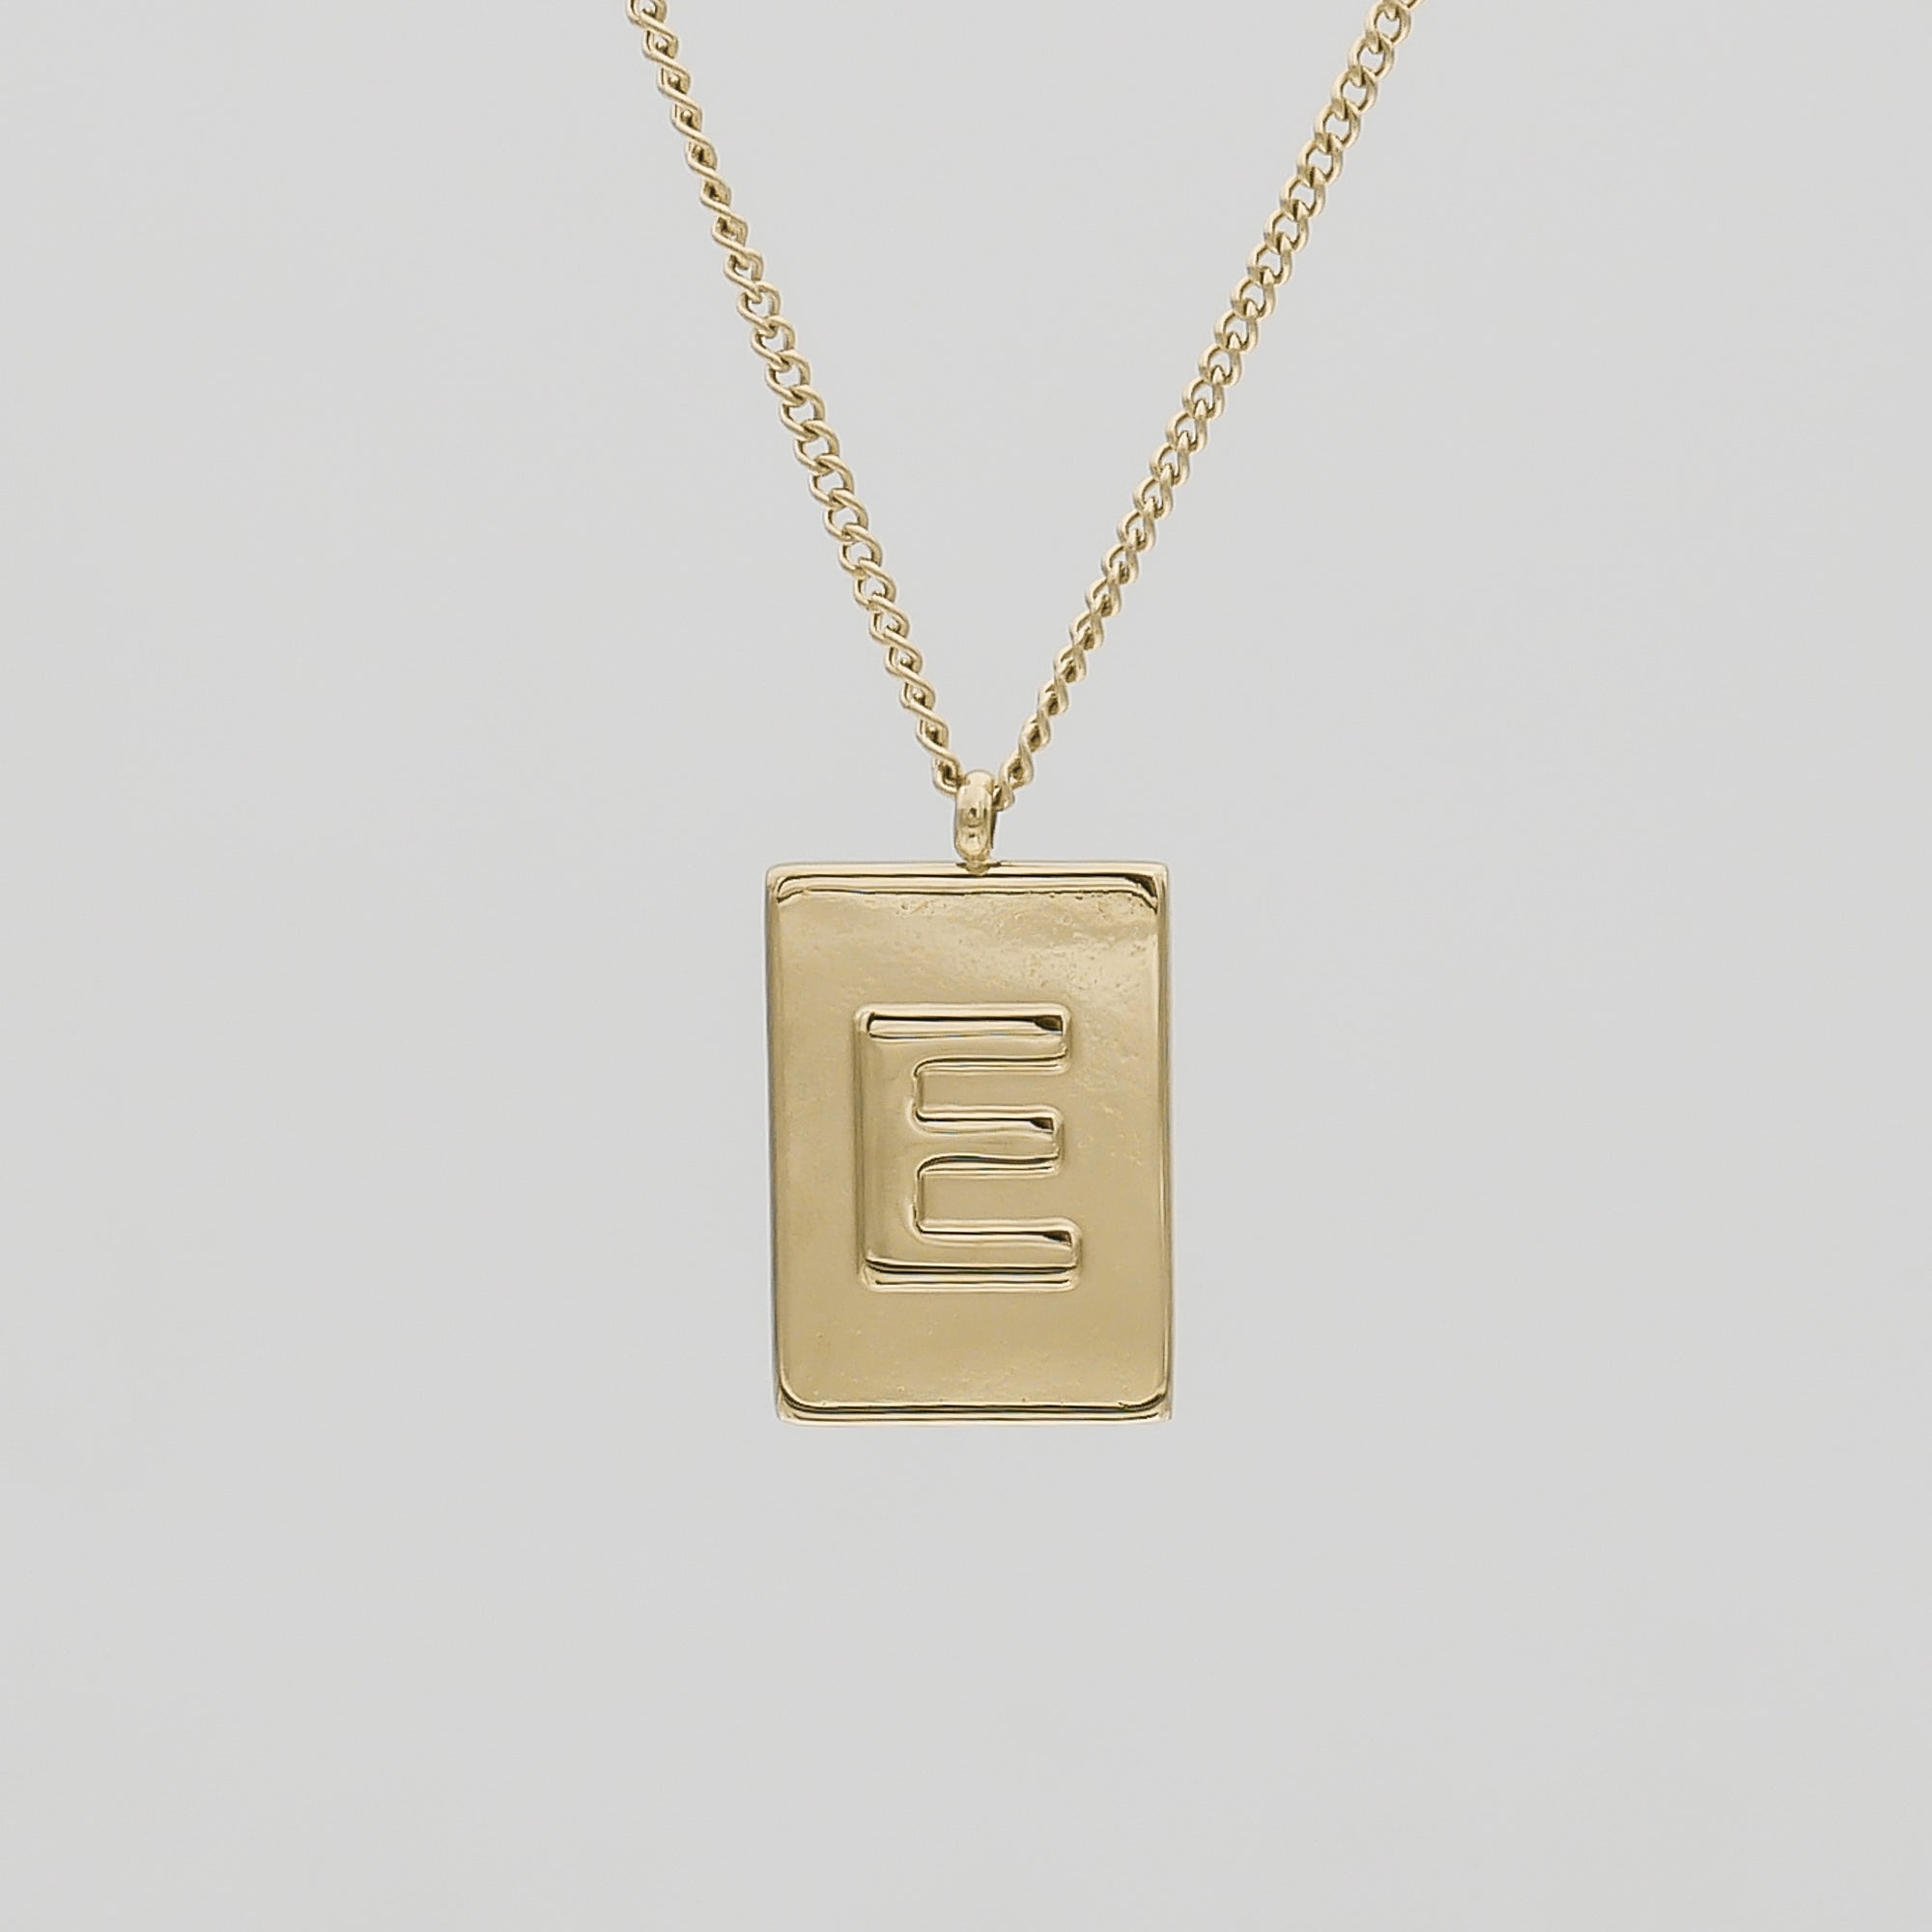 Athena custom initial Gold pendant Necklace, letter E by PRYA